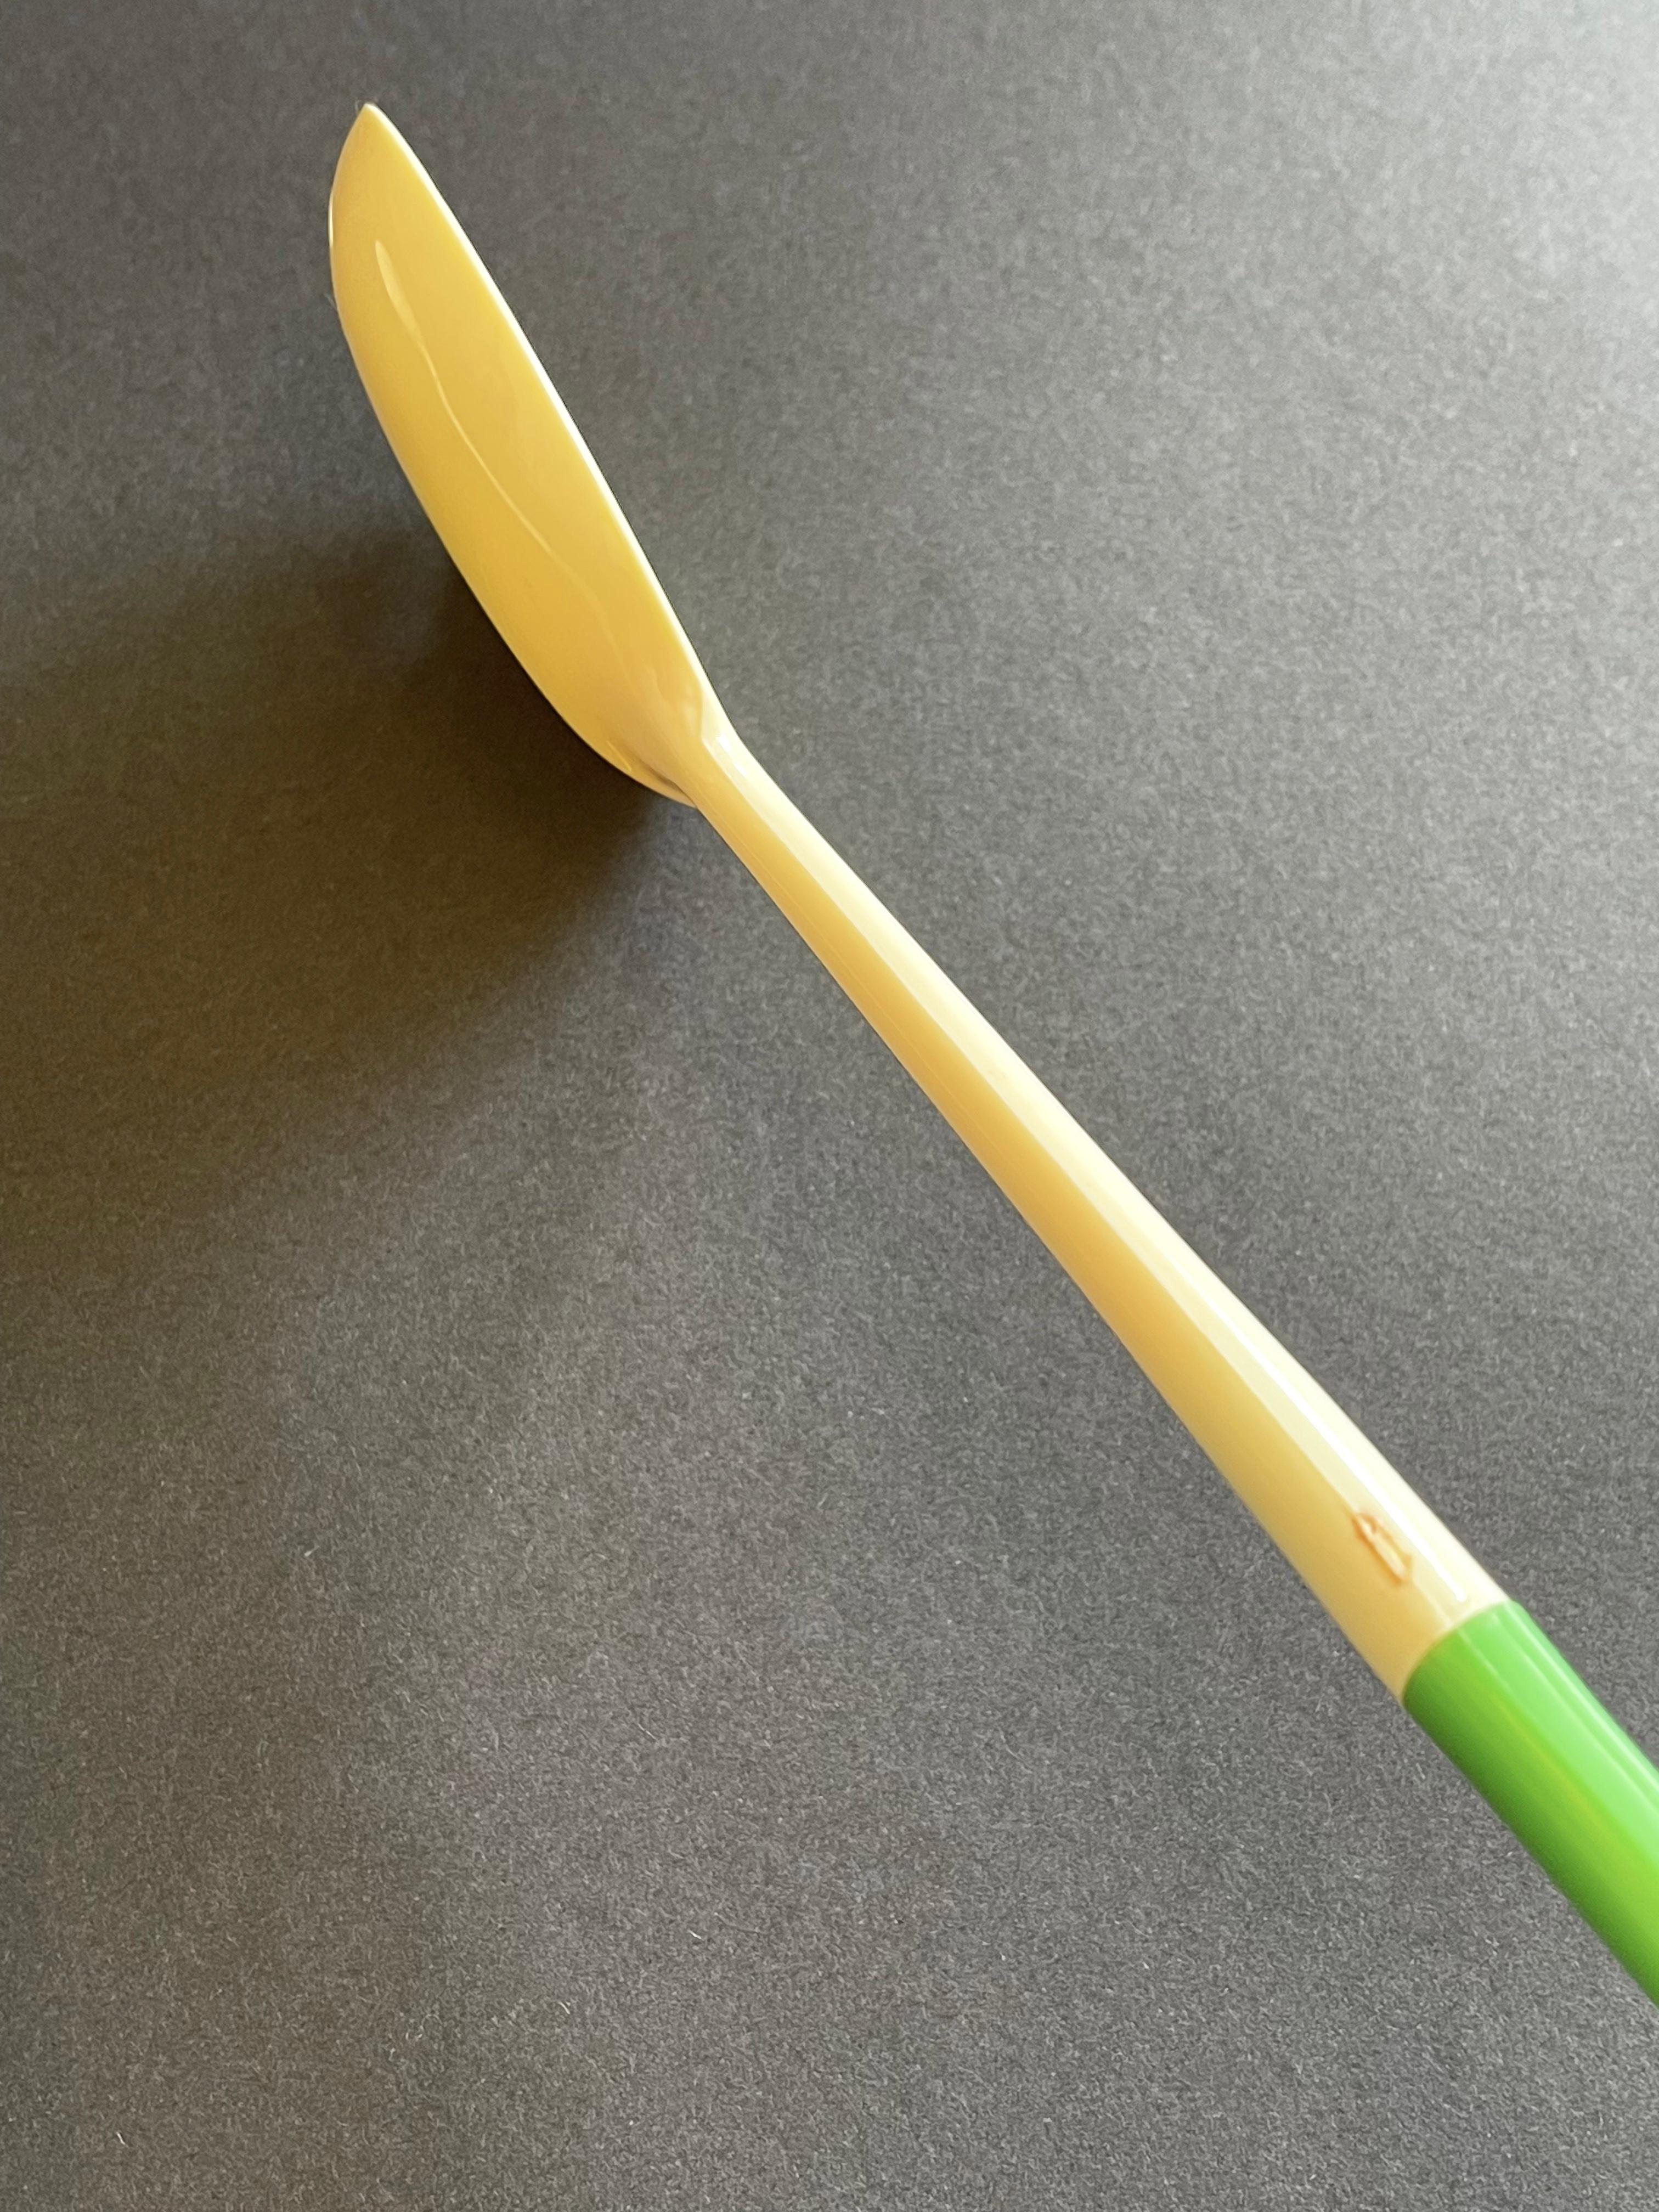 Plastic Kartell Salad Spoon & Fork Casalinghi, 1958 Design, Gino Colombini, Milan, Italy For Sale